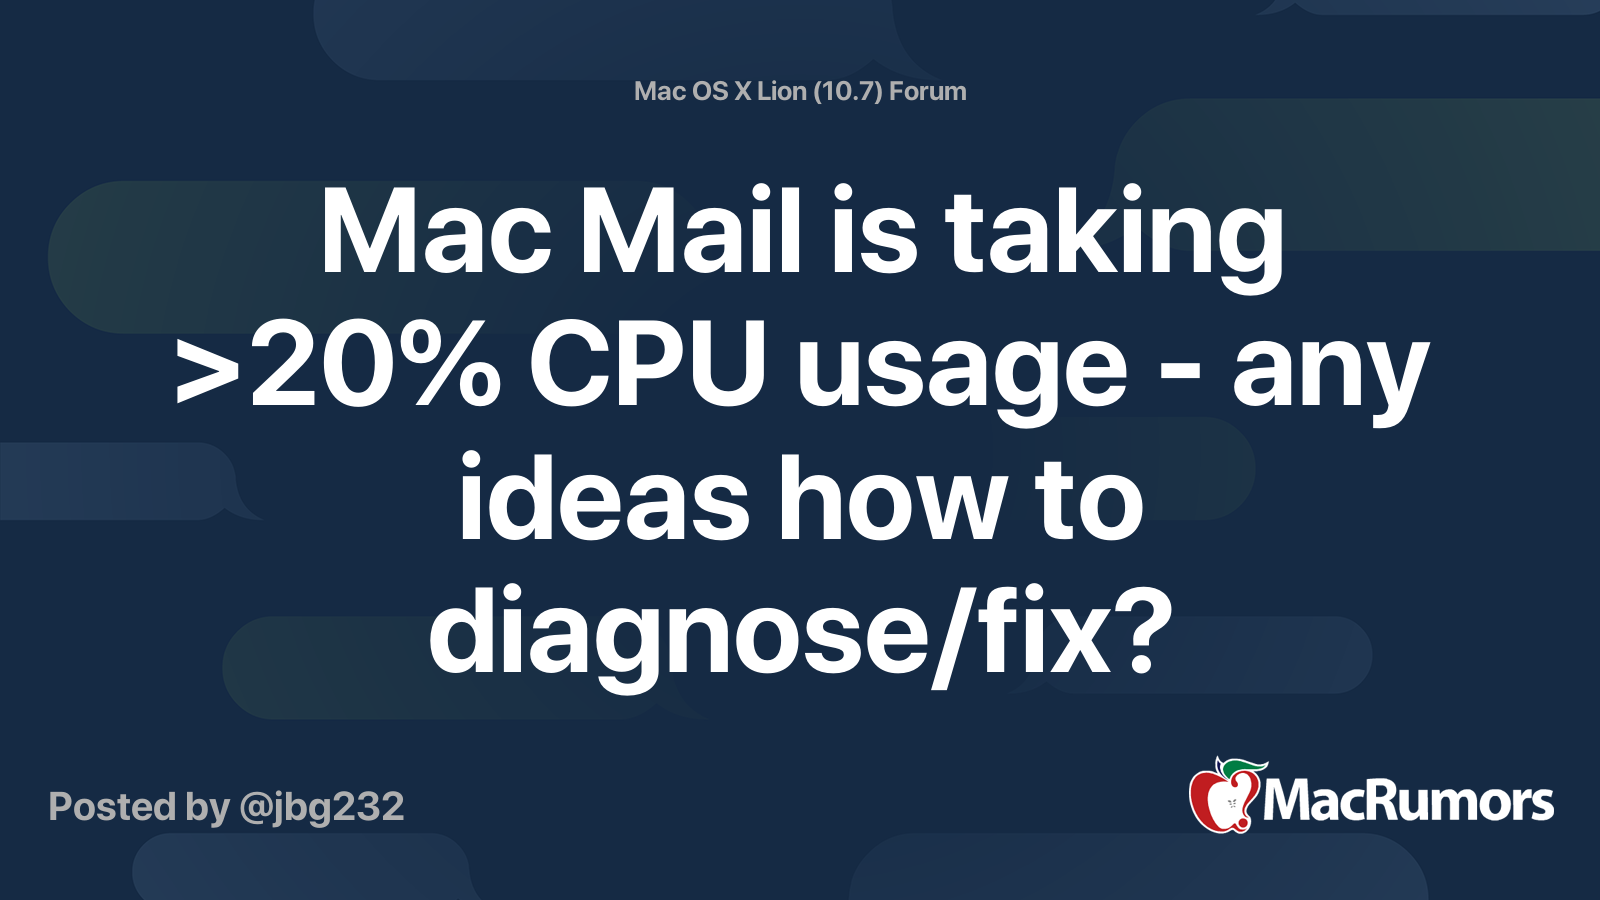 Mac Mail is taking >20% CPU usage - any ideas how to diagnose/fix? - MacRumors Forums